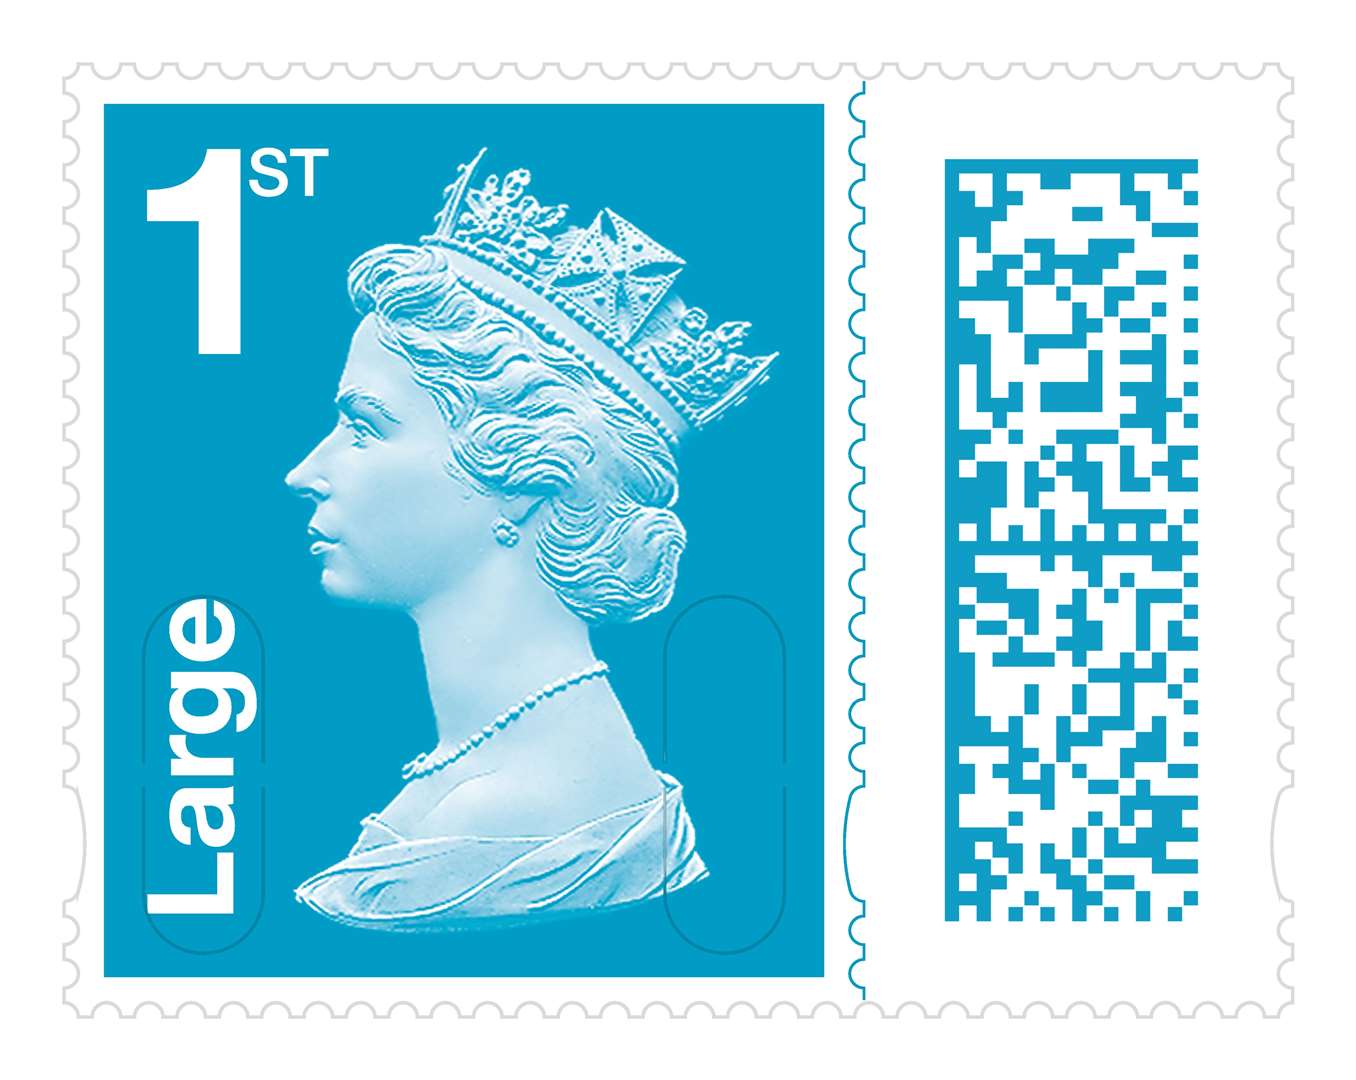 The stamps will replace the original design which will now be phased out